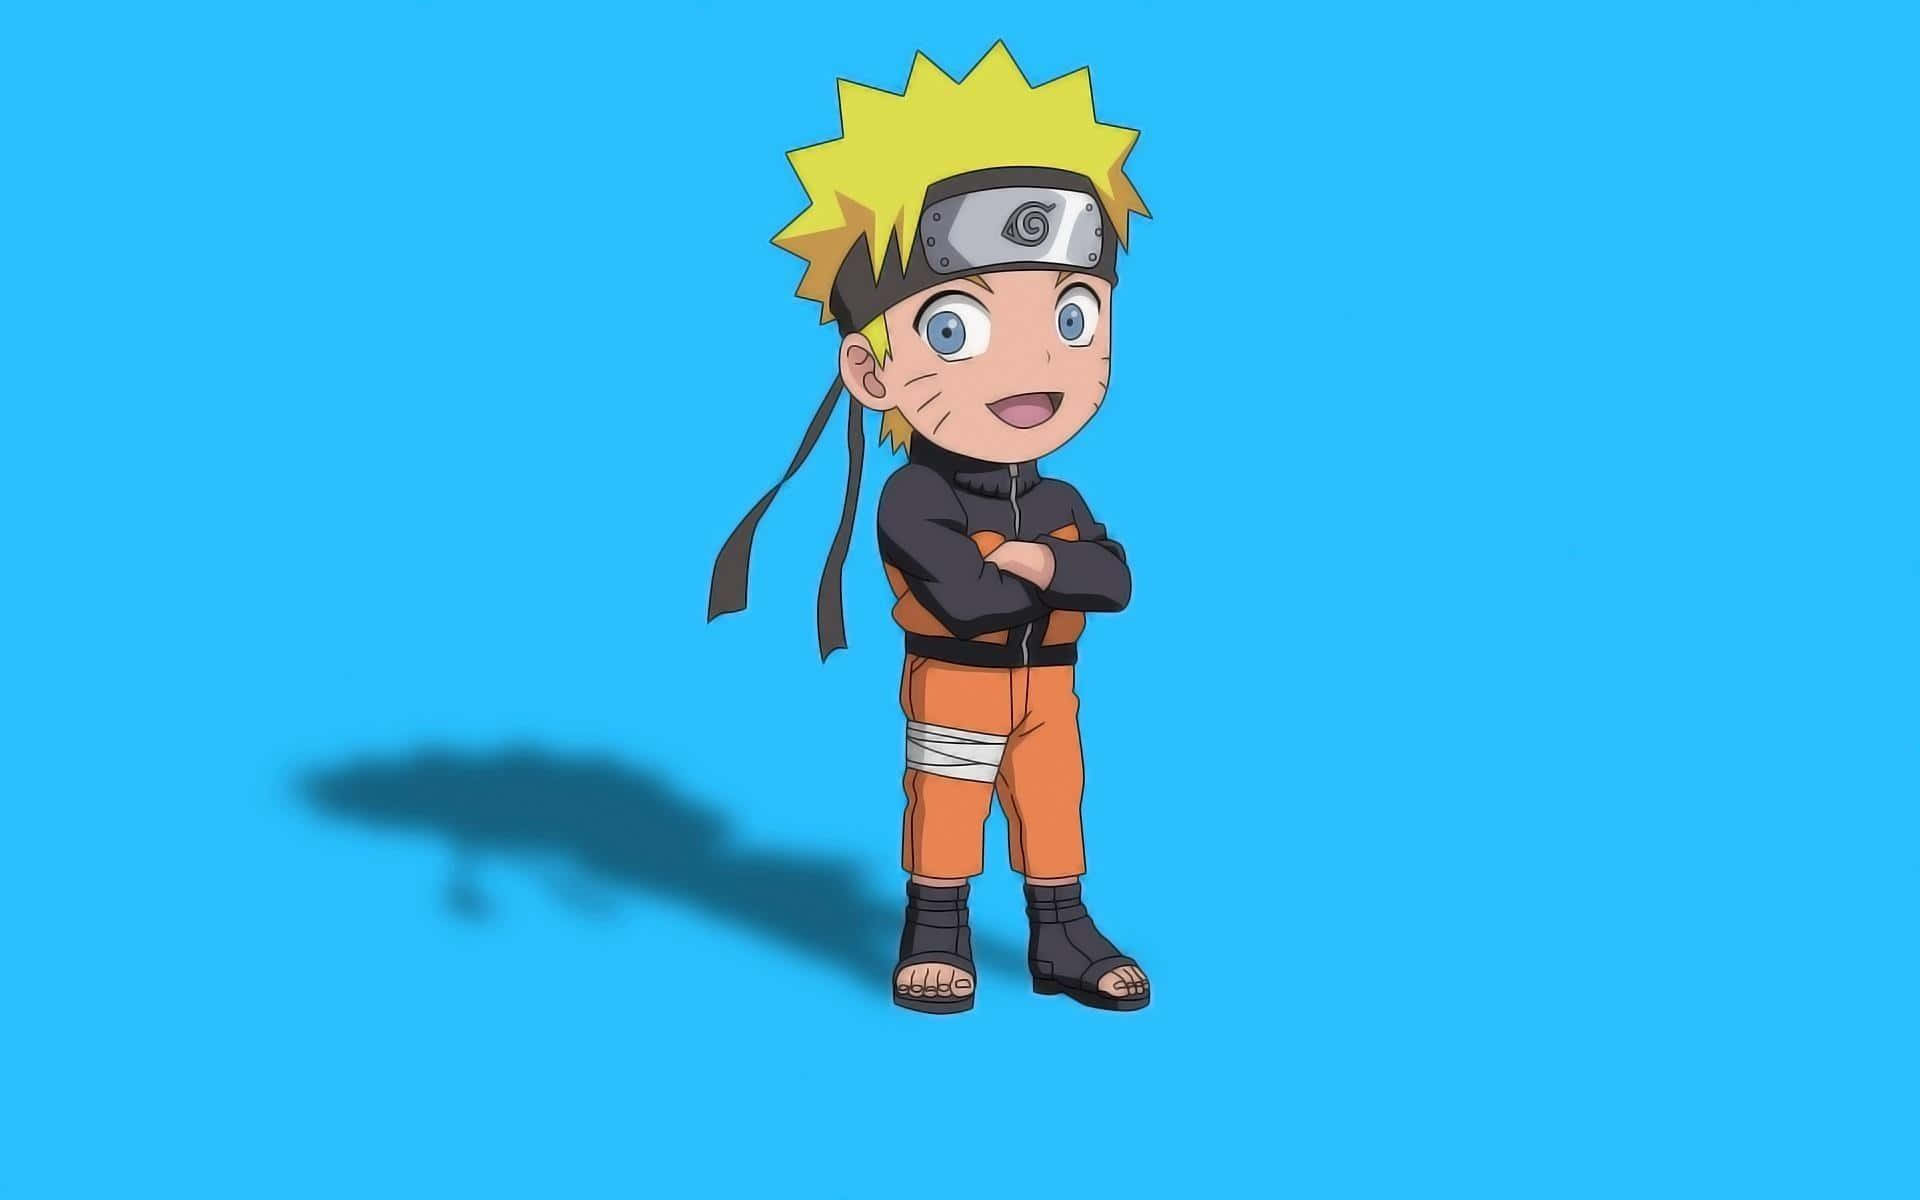 Cute and Courageous, Naruto Chibi Taking on the World Wallpaper